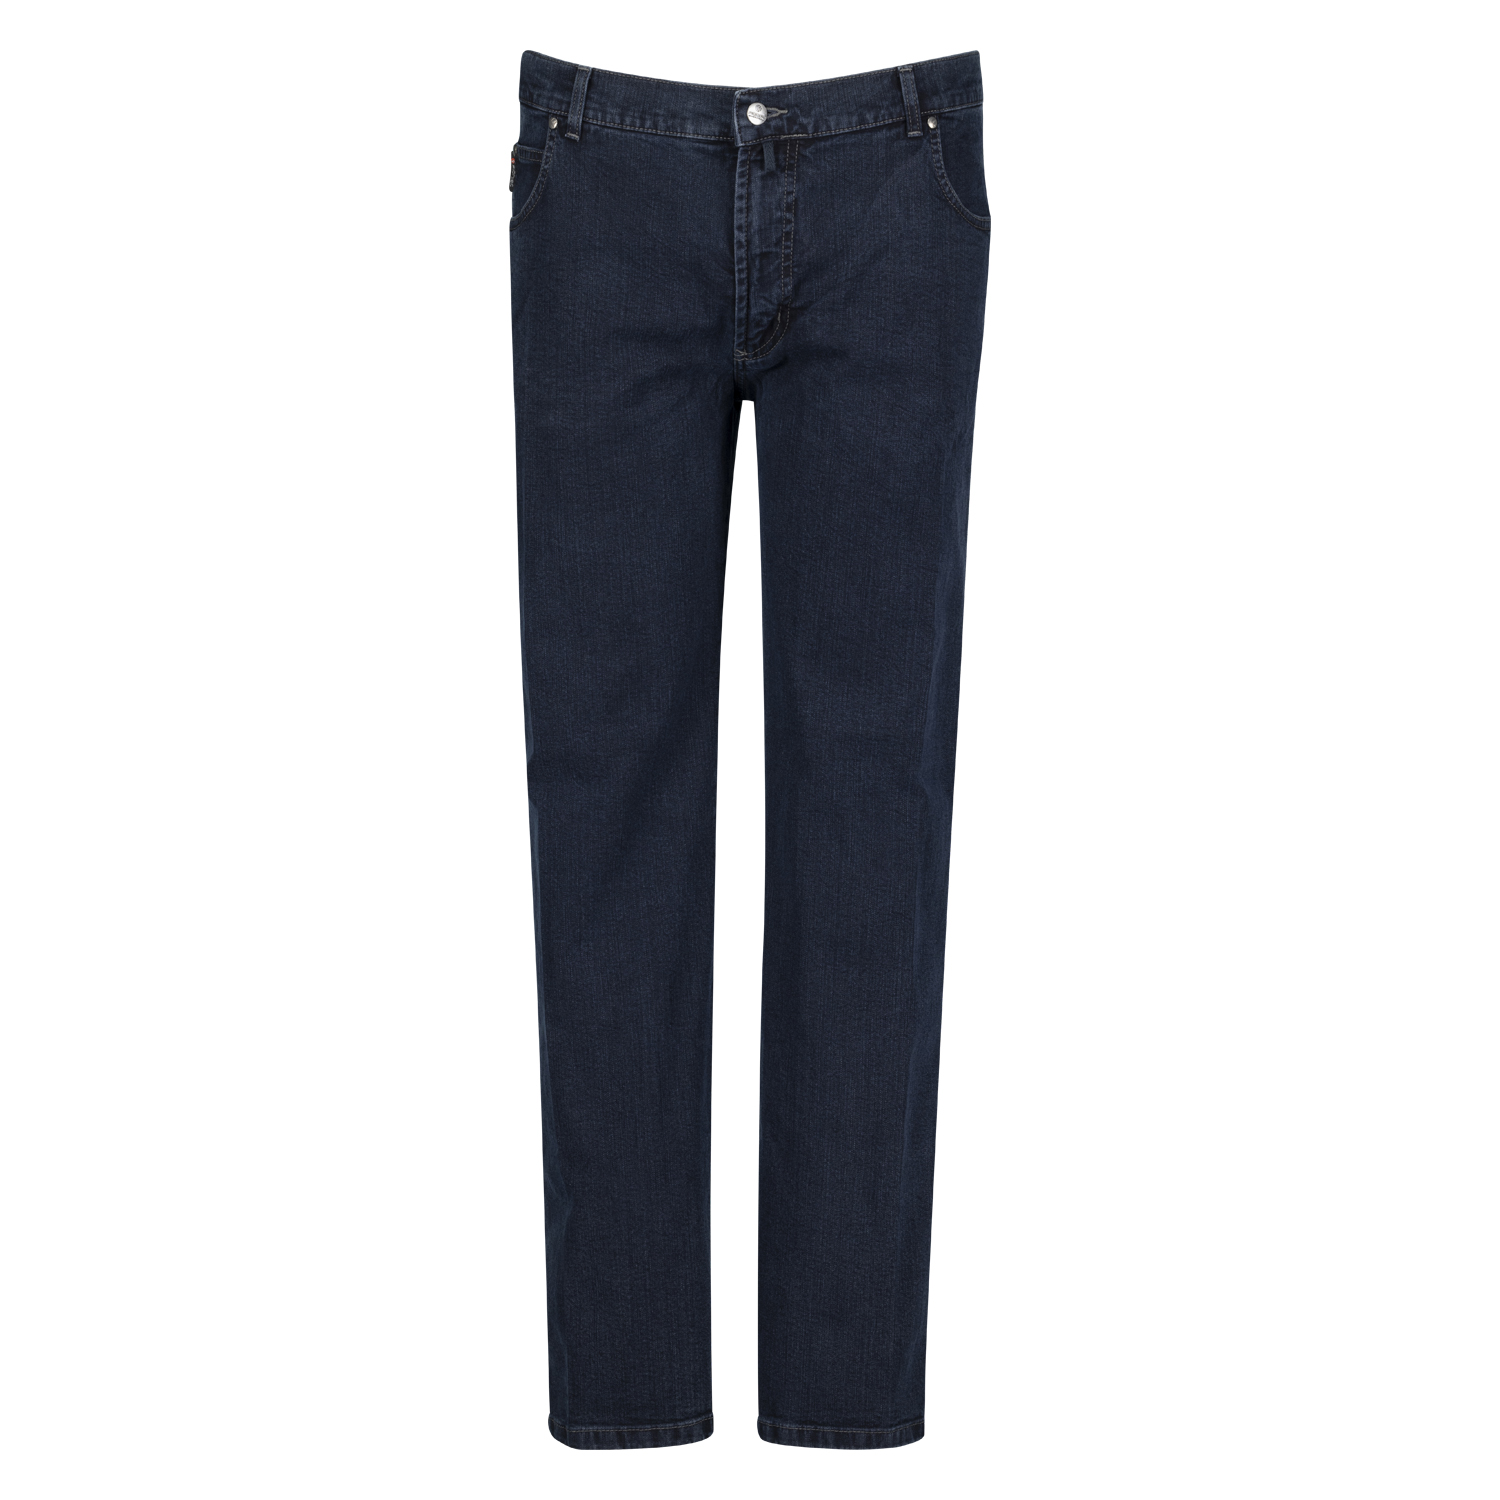 5-Pocket Jeans homme avec stretch "Peter" dark blue stonewash by Pioneer grandes tailles (Taille basse): 28 - 40